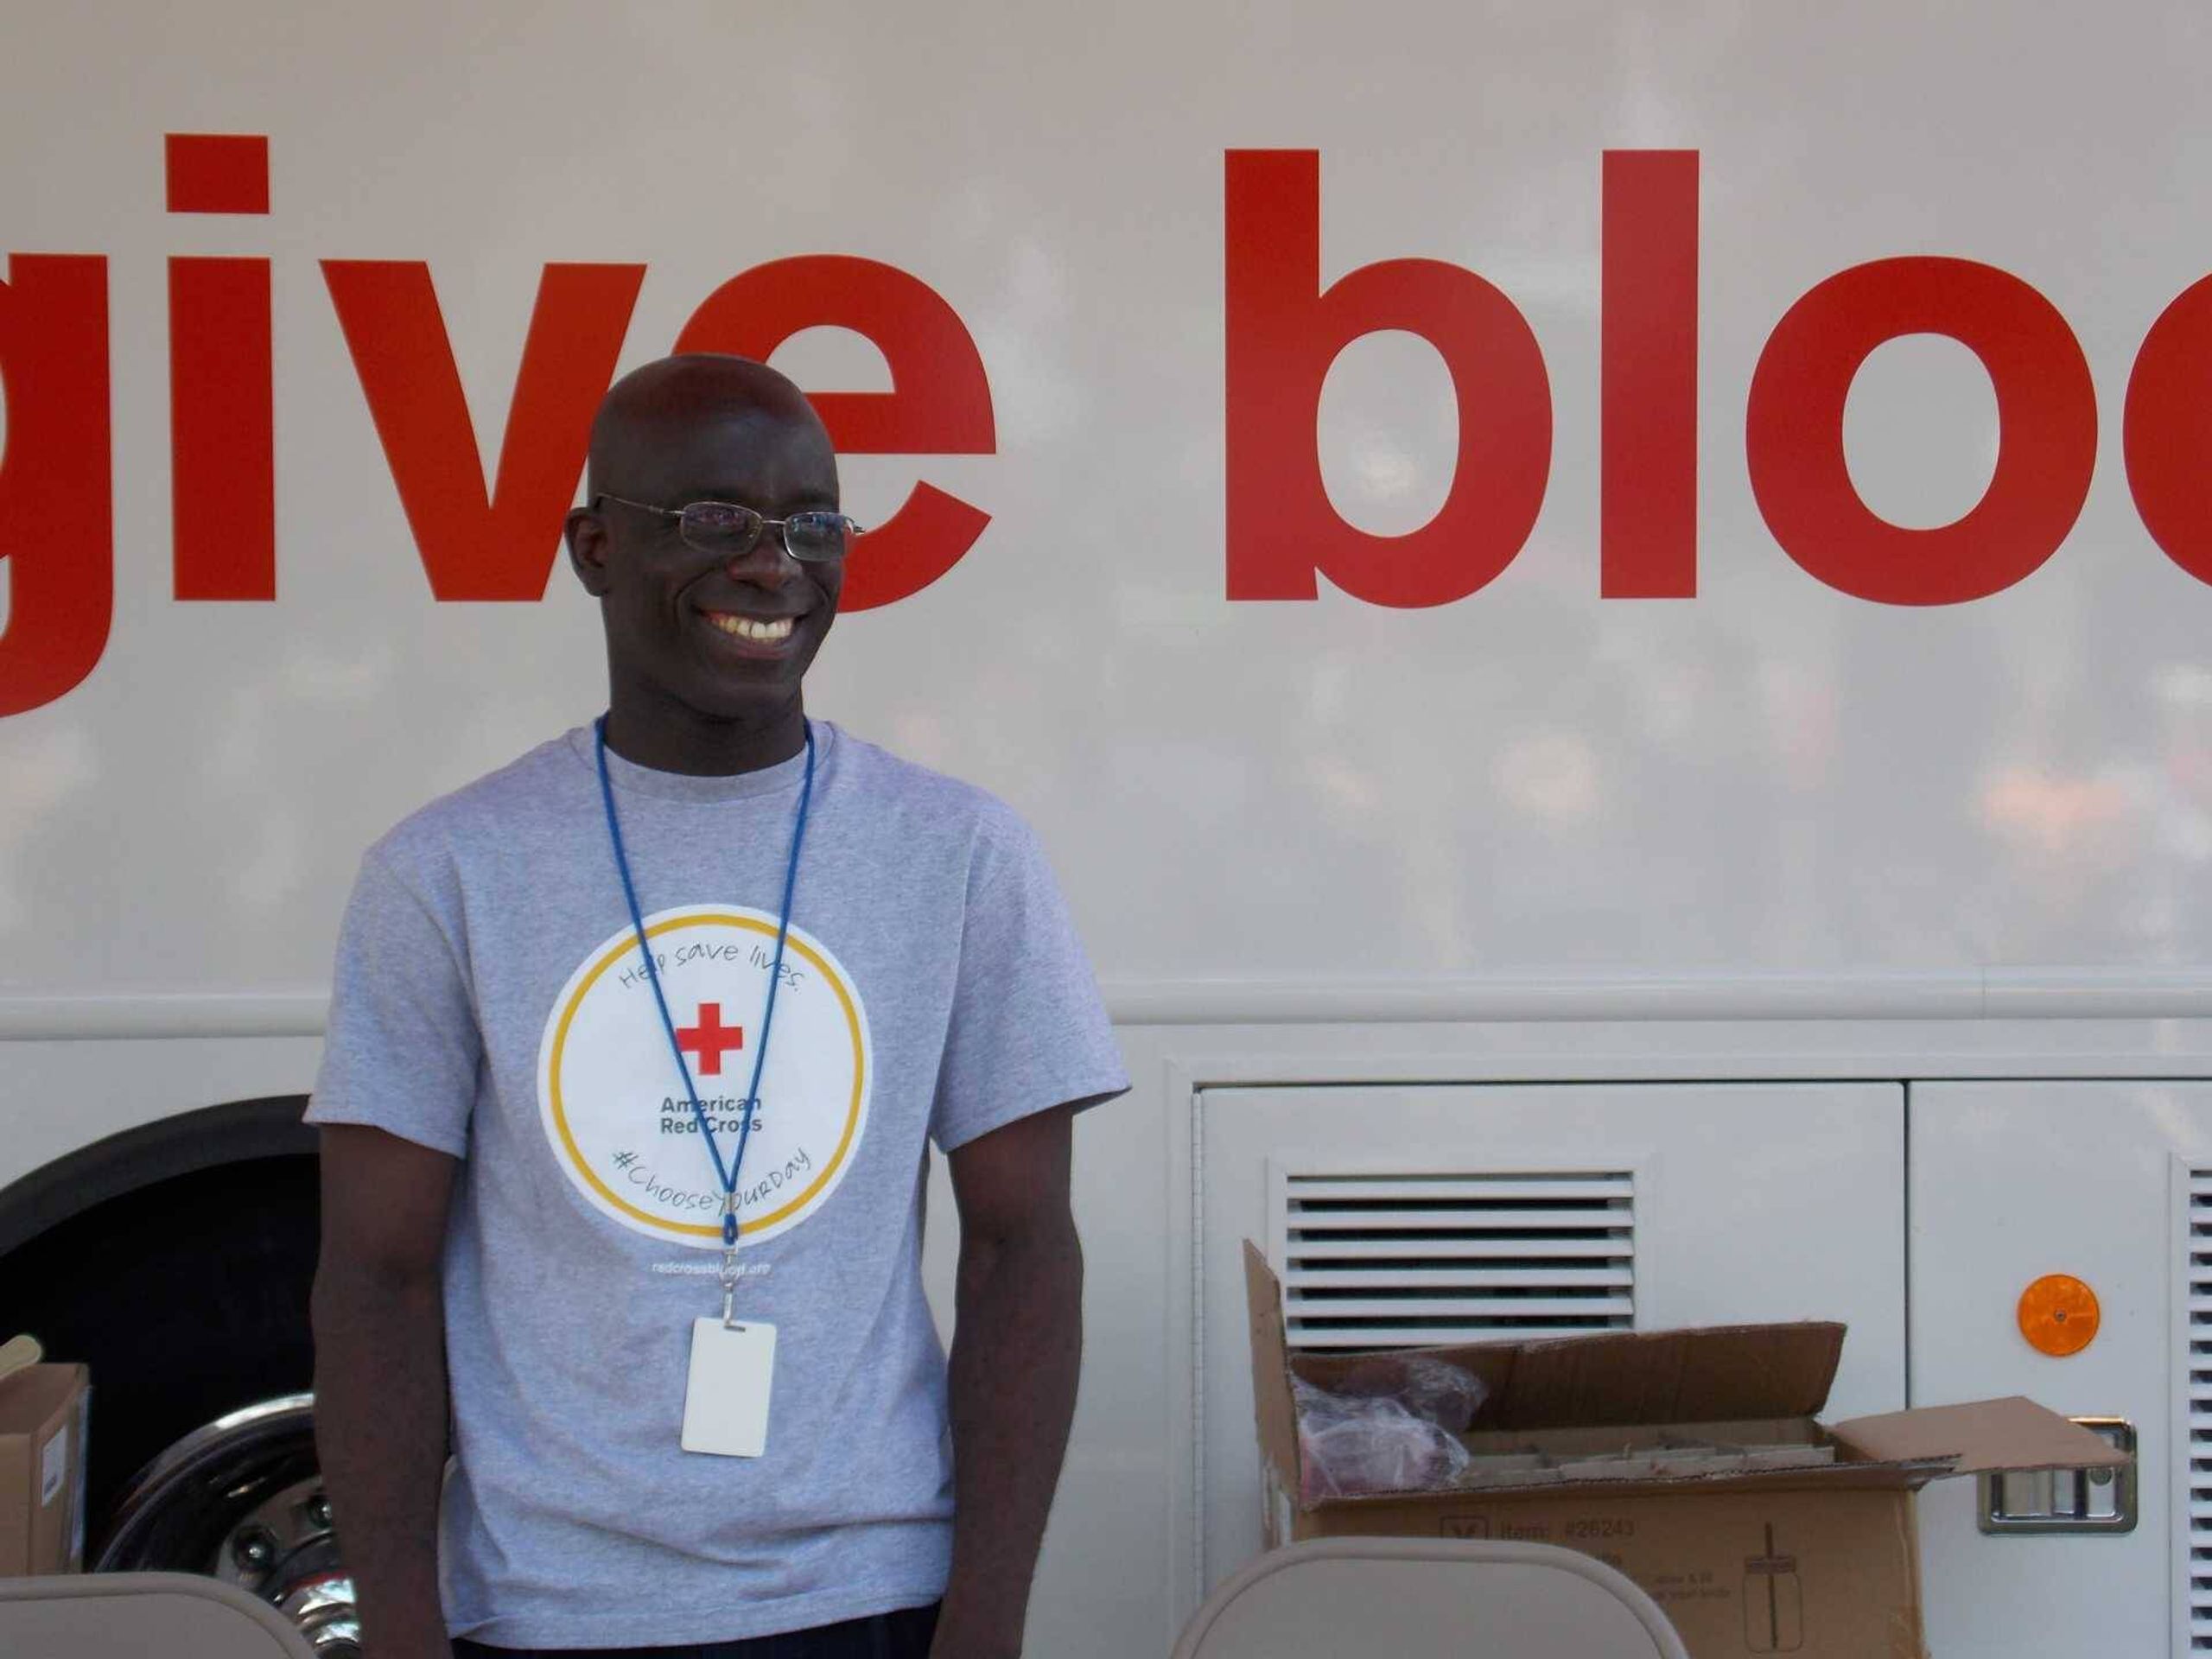 Man dressed in grey t-shirt standing outside of a van that reads "give blood"